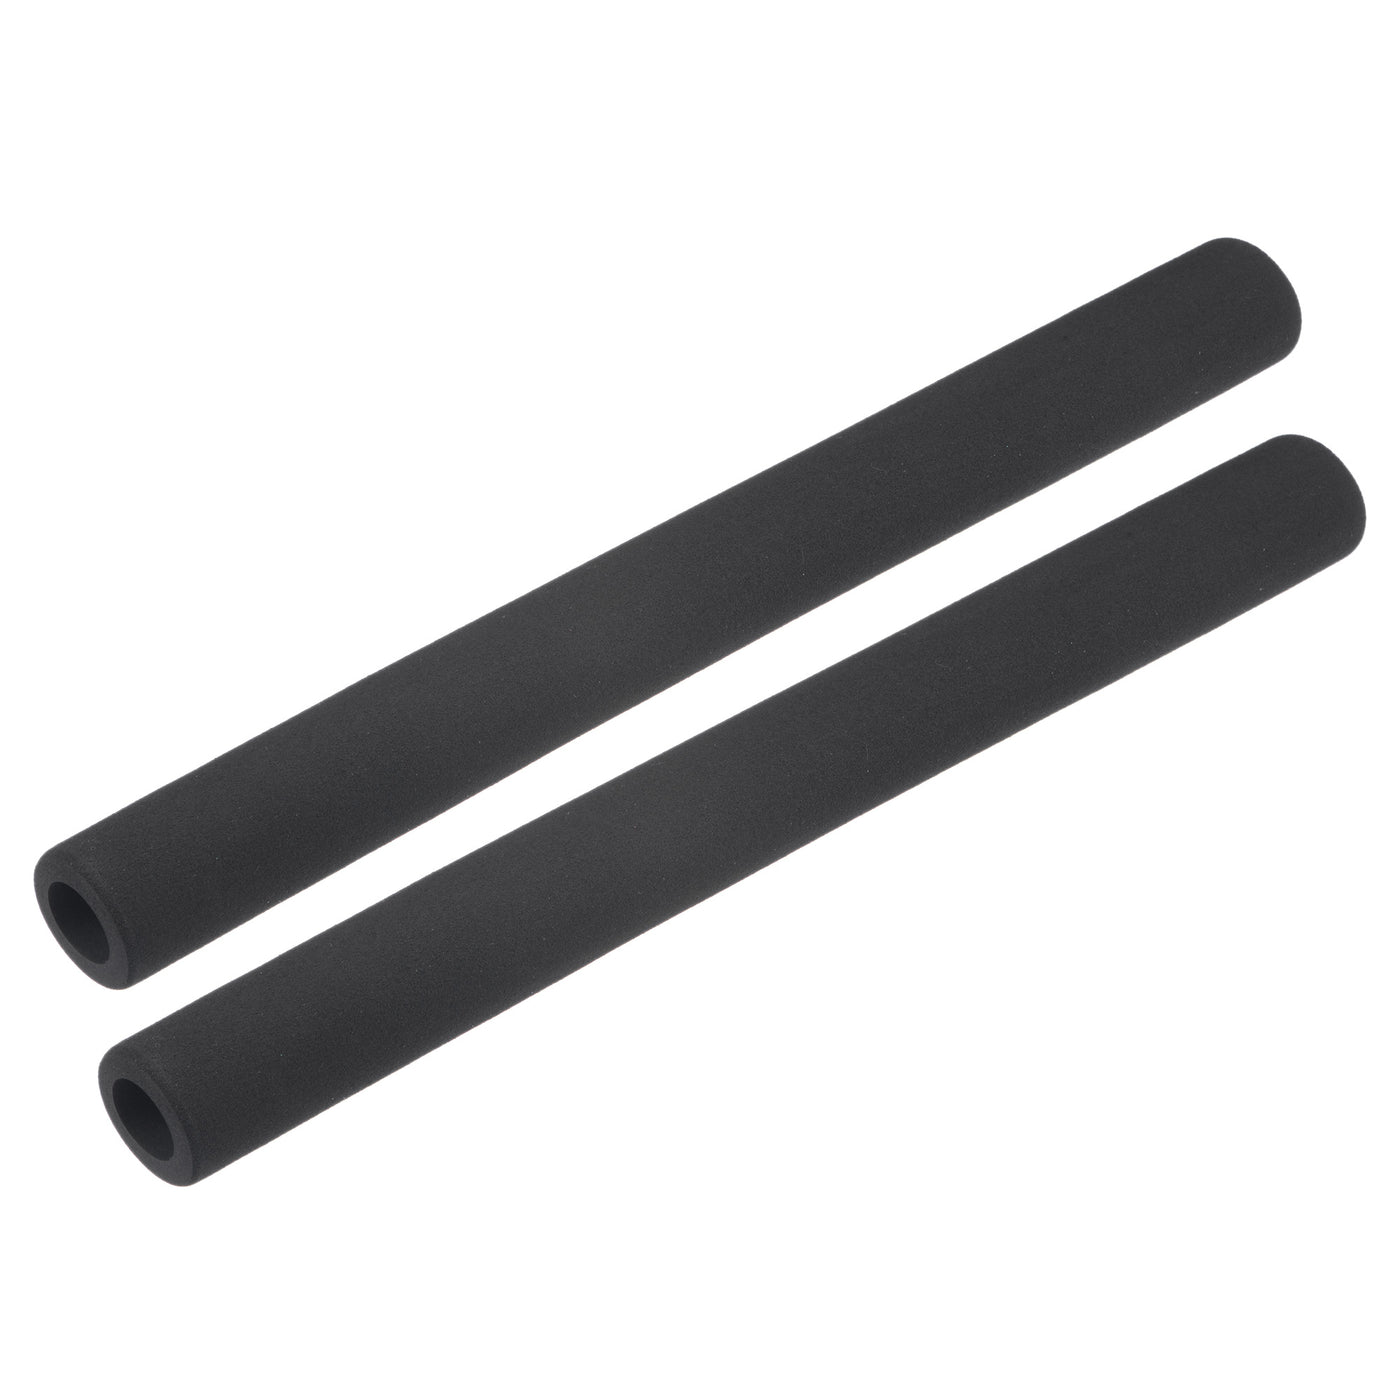 Uxcell Uxcell Foam Tubing for Handle Grip Support, Pipe Insulation, 17mm ID 27mm OD 295mm Length Black 2pcs